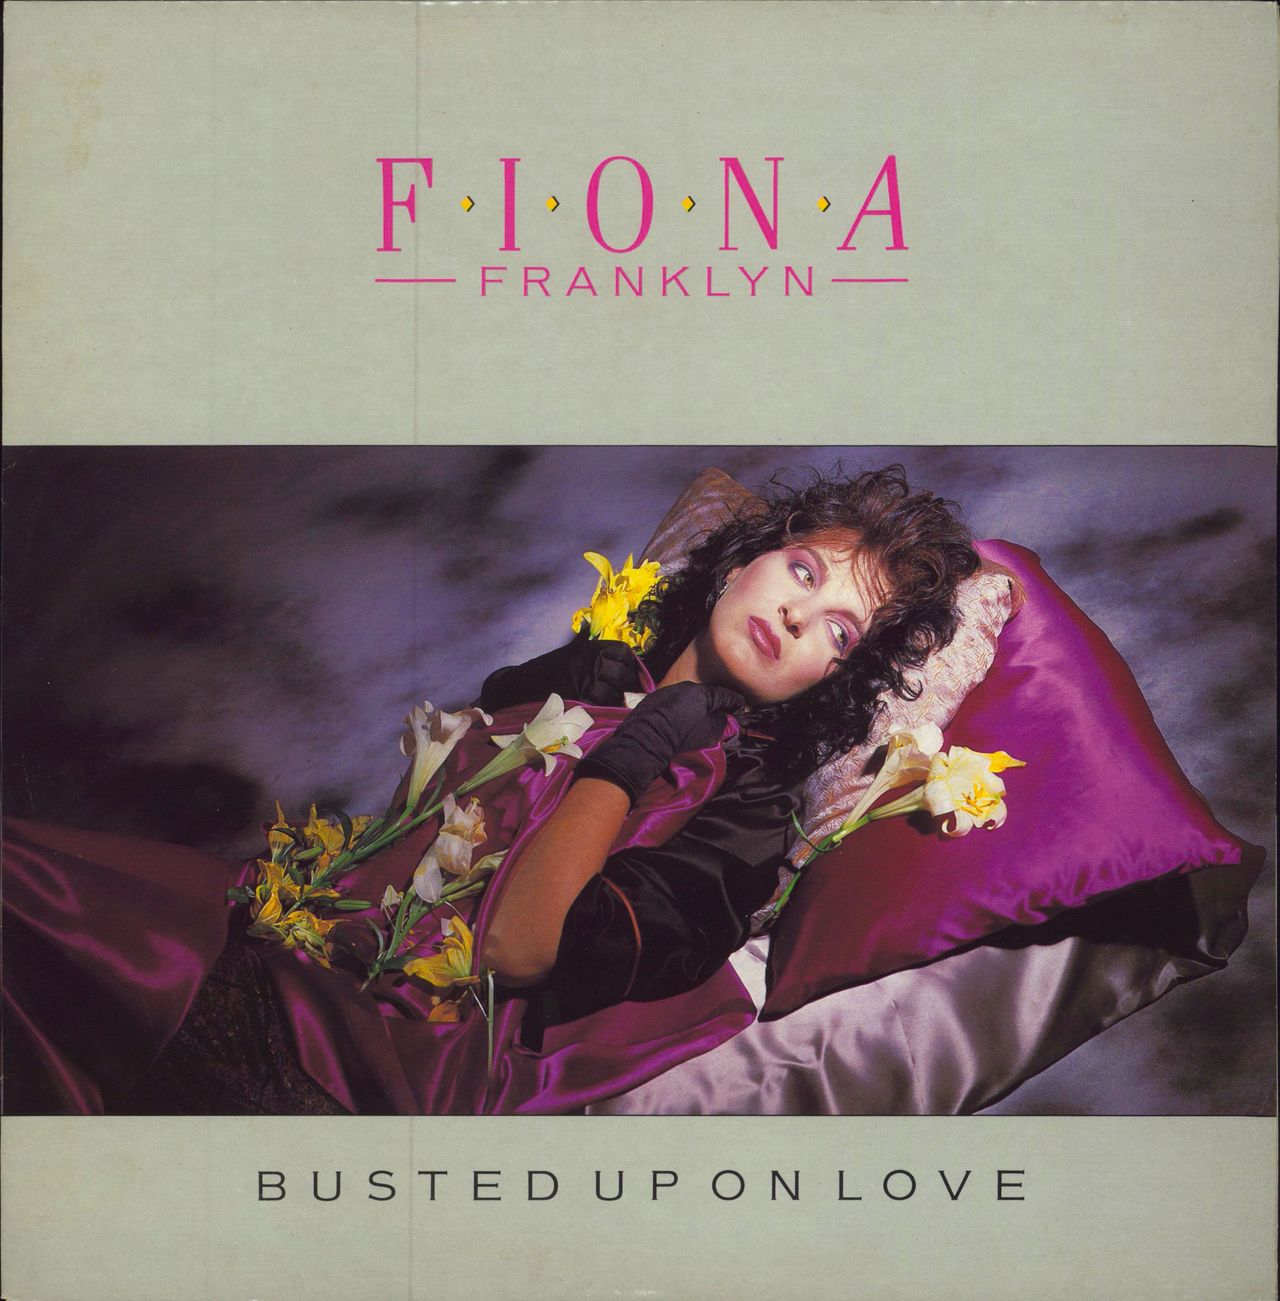 Fiona Franklyn Busted Up On Love UK 12" vinyl single (12 inch record / Maxi-single) VS726-12